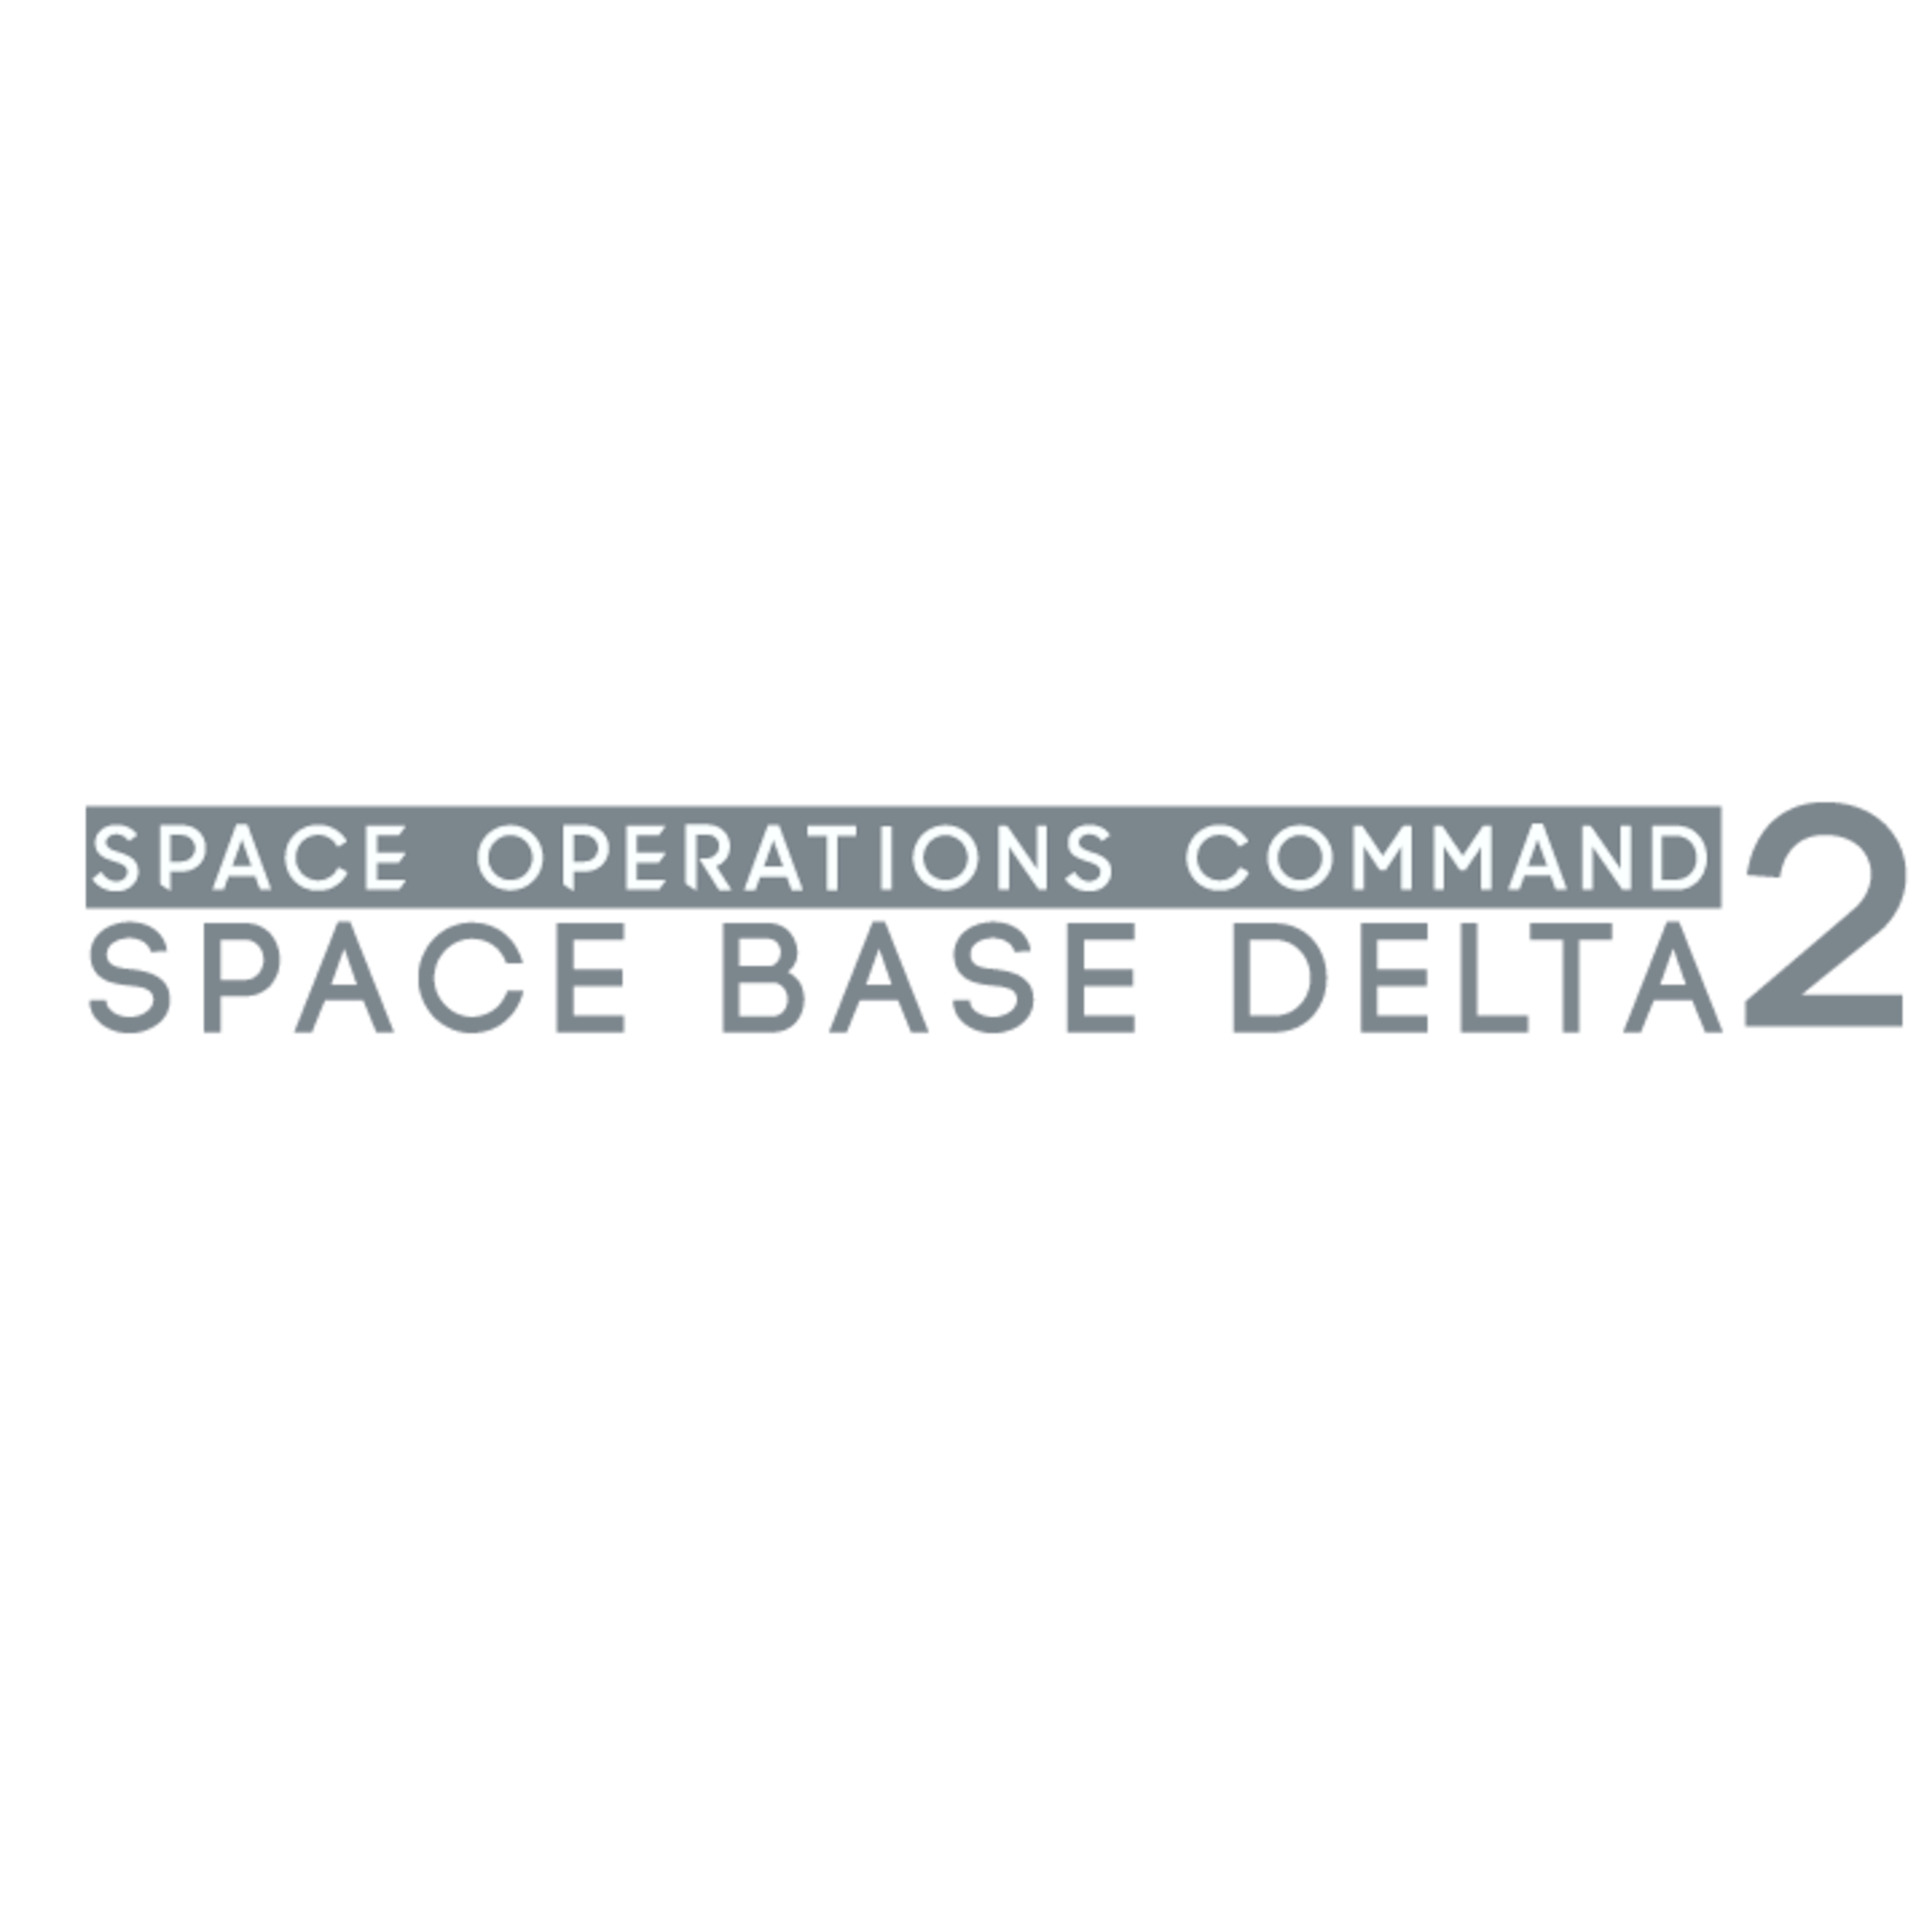 Space Delta 2 > Space Operations Command (SpOC) > Display